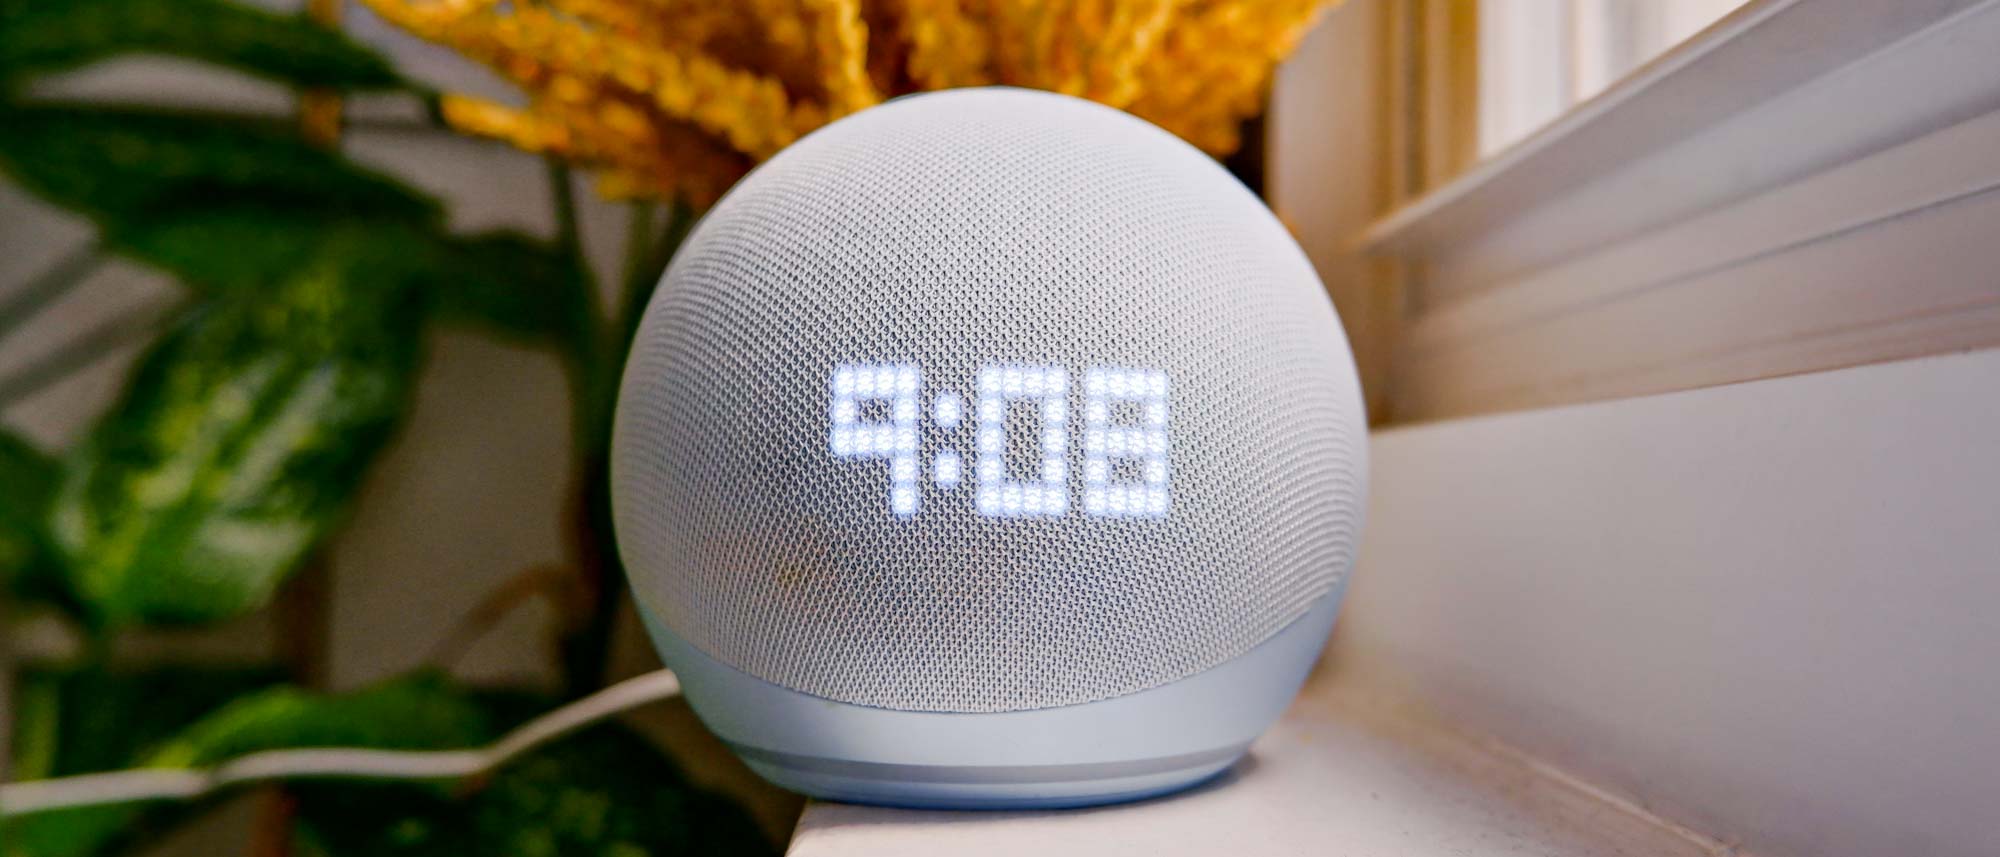 Echo Dot 5th Gen smart speaker review: Small yet mighty, eco dot